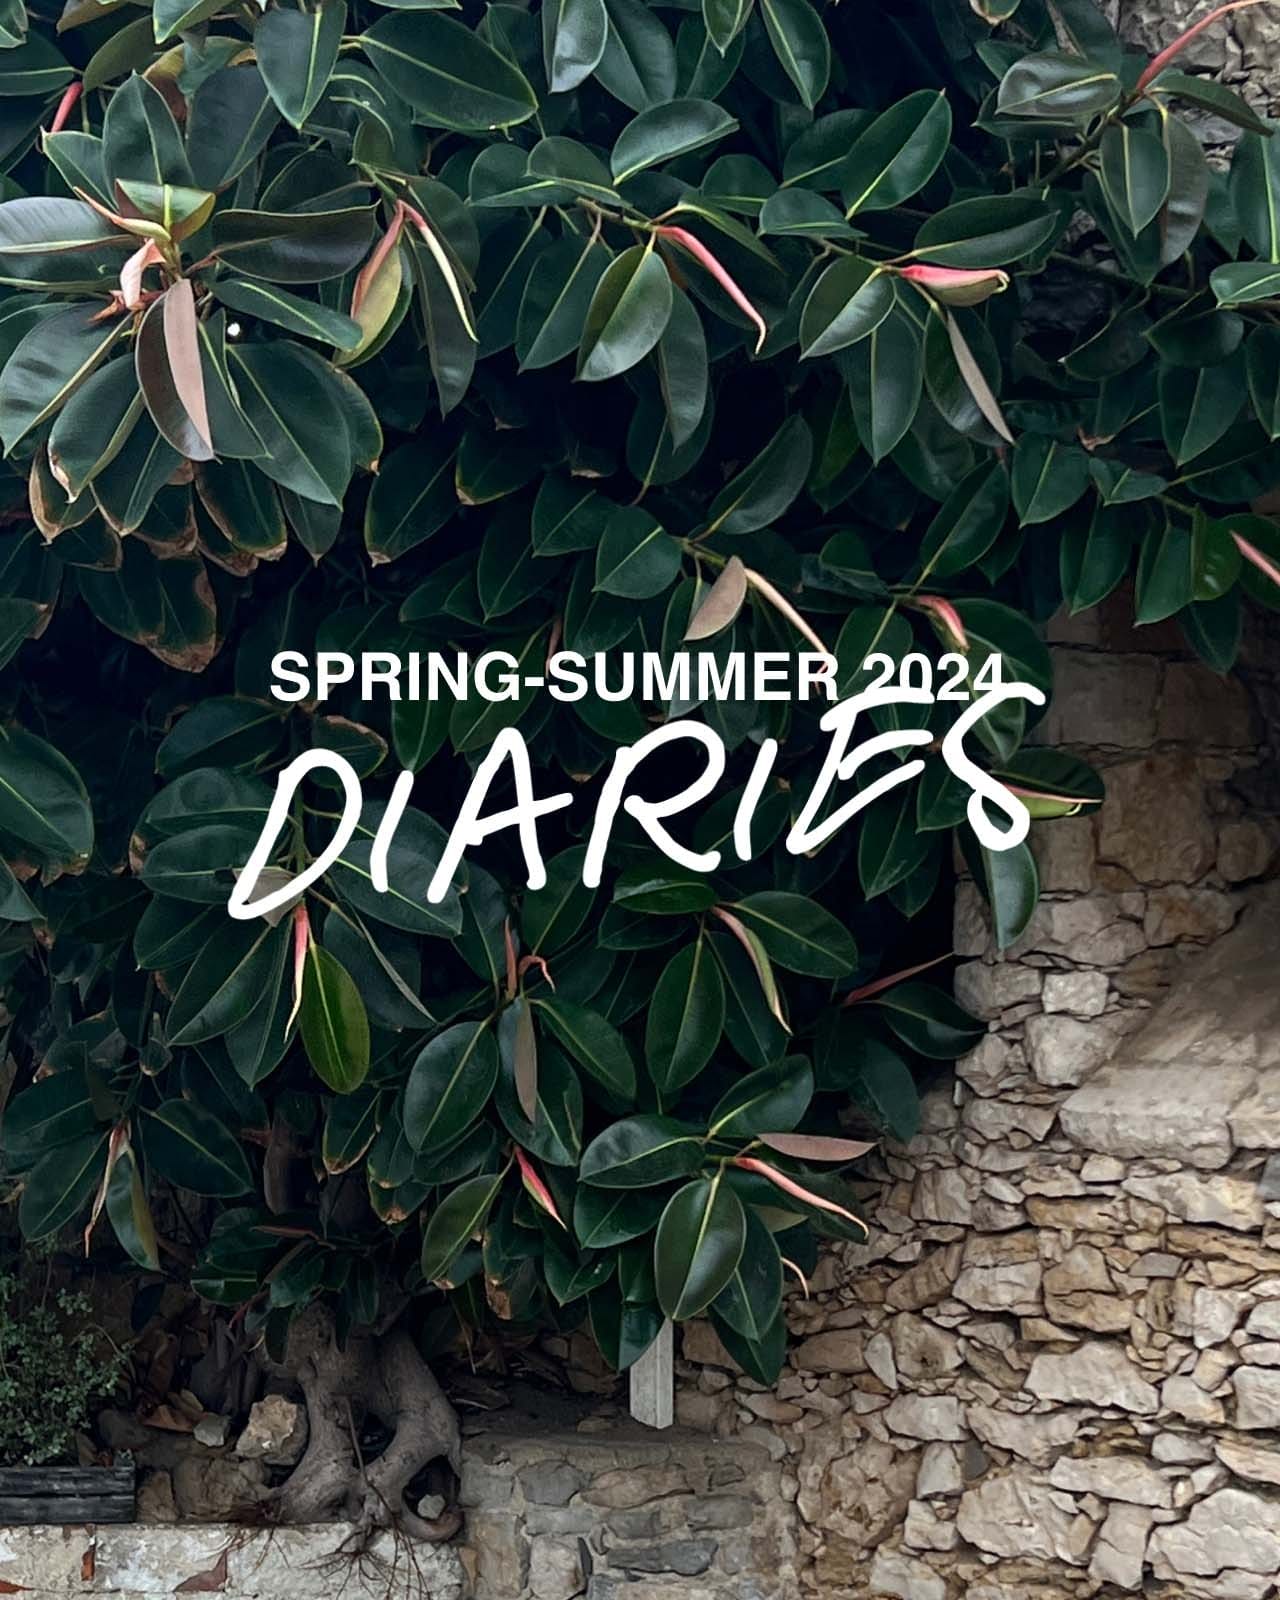 Green outdoor plant with text that reads SPRING-SUMMER 2024 DIARIES